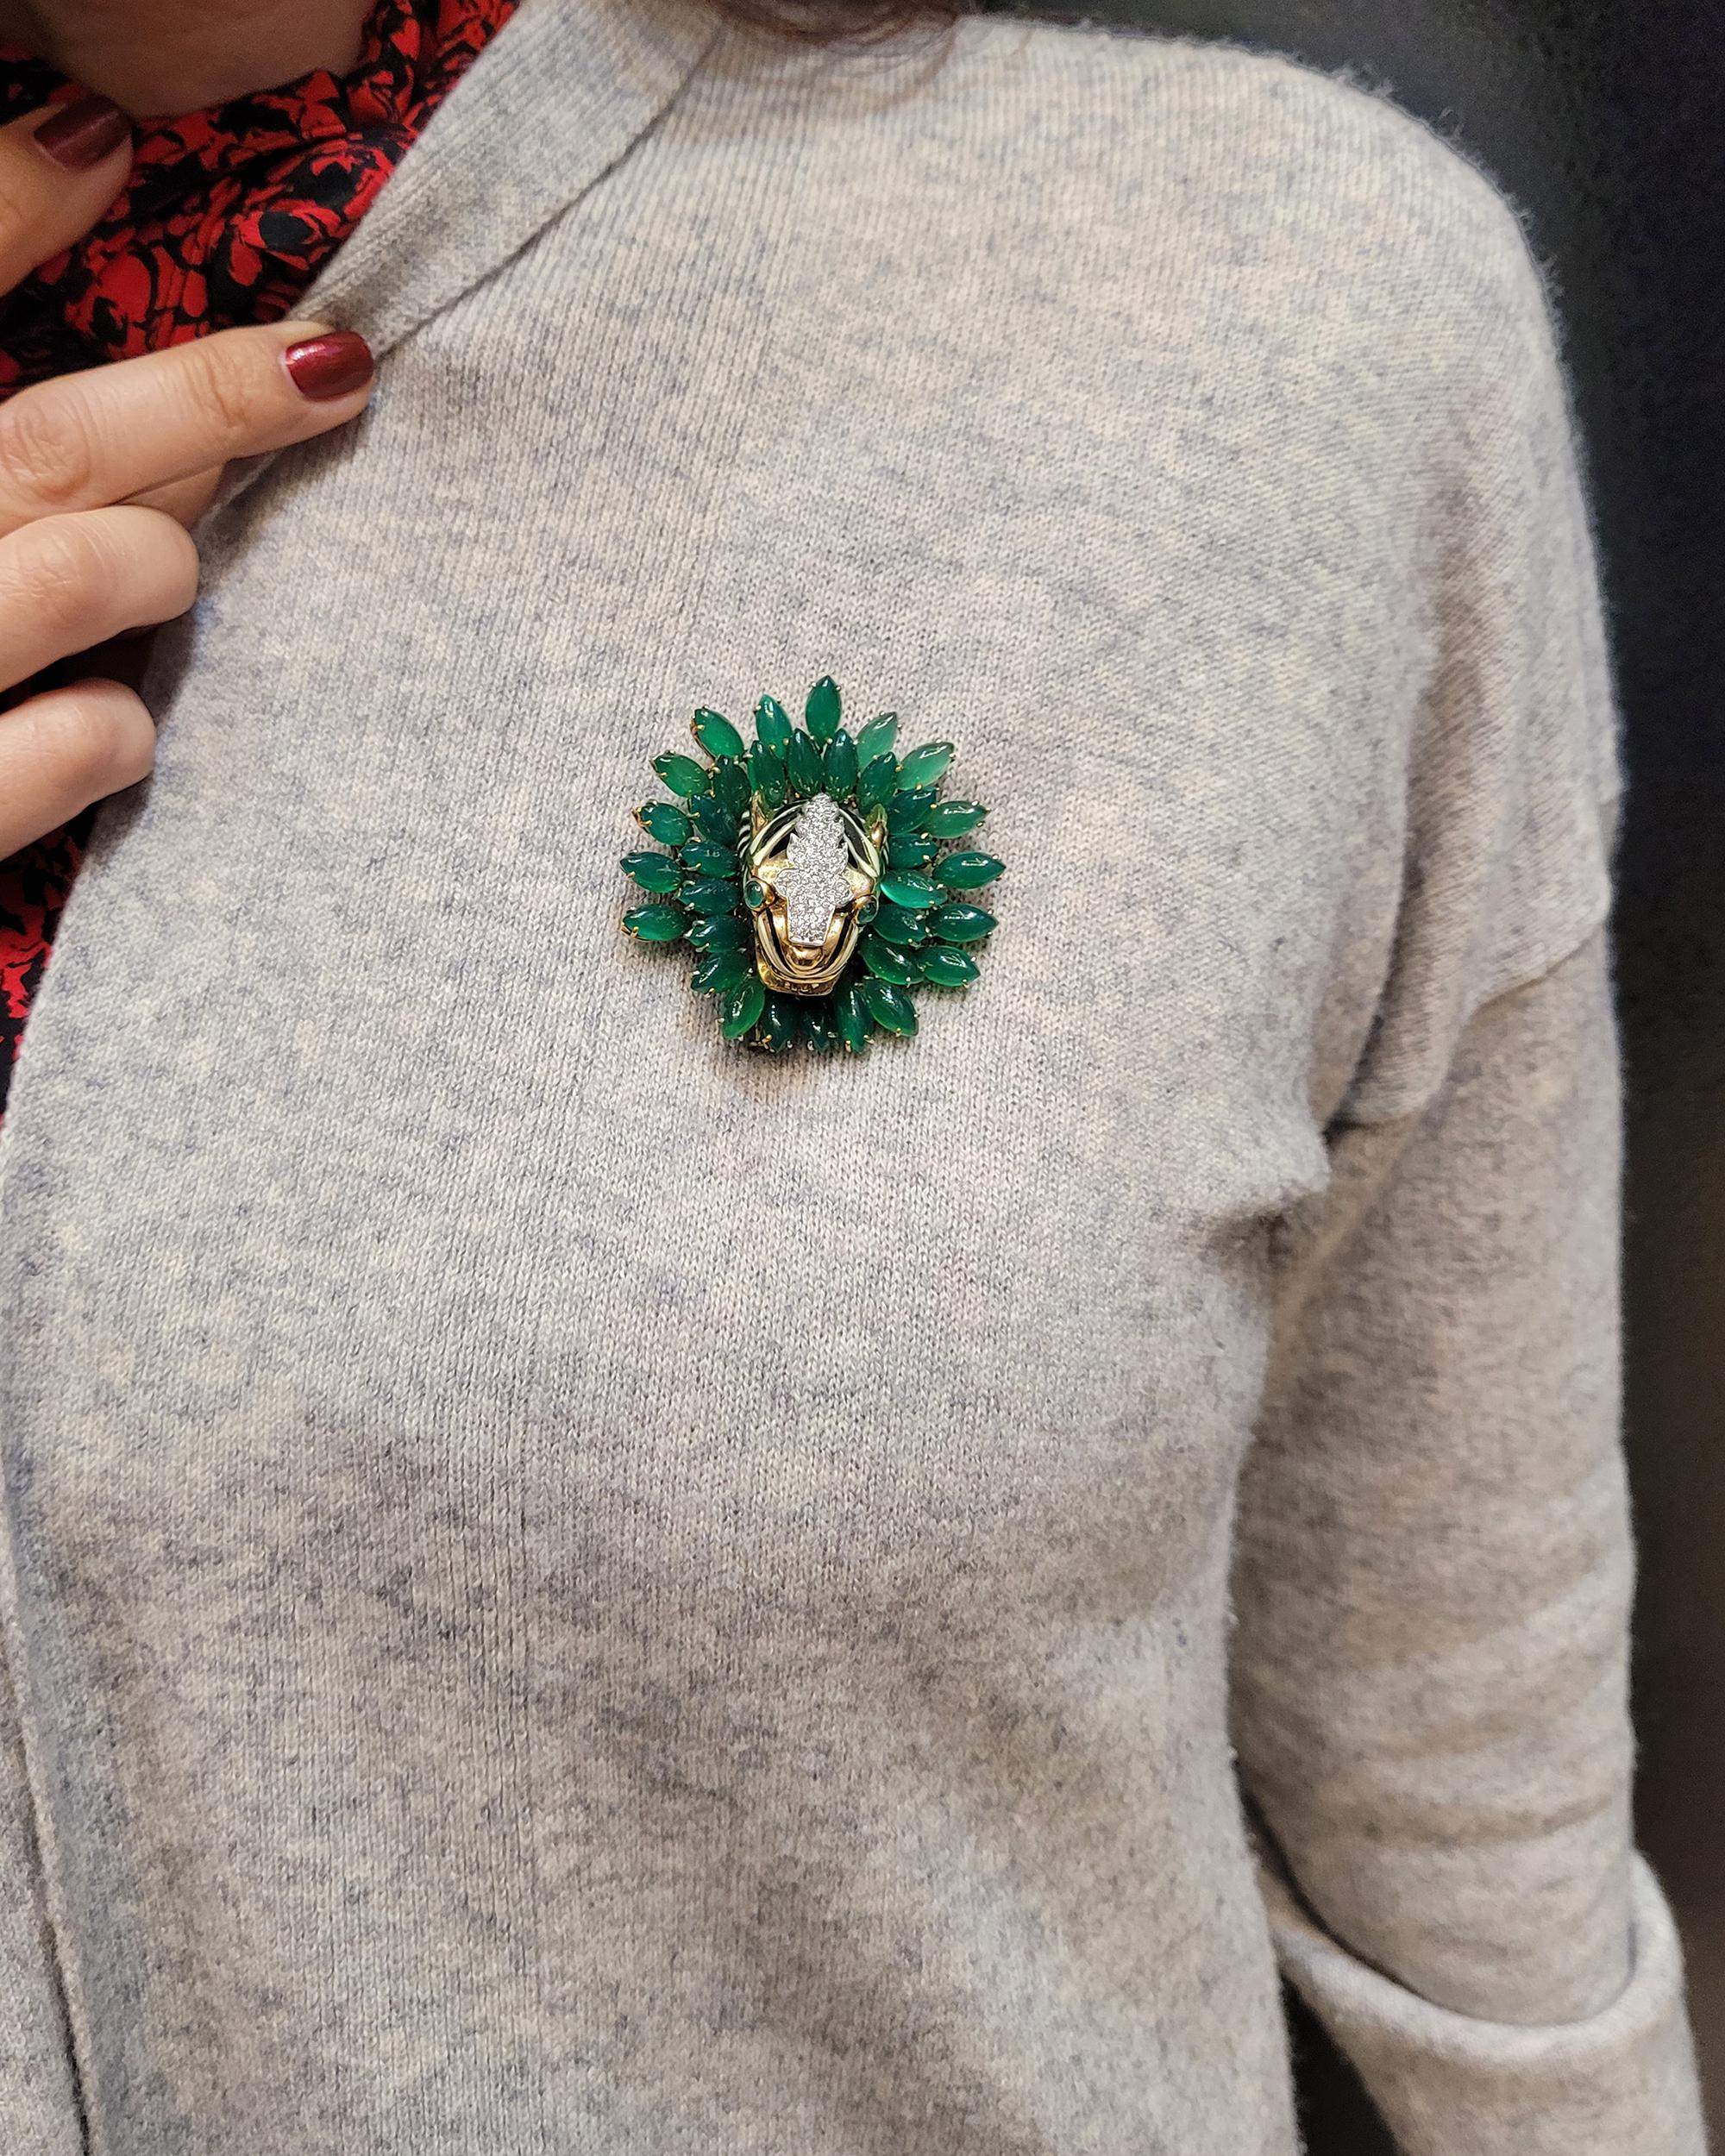 Stunning Tiger Head Brooch created by David Webb, featuring marquise green onyx, cabochon emeralds, approximately 0.99 carats of brilliant-cut diamonds, set in 18K yellow gold and platinum.
Signed David Webb.
Certificate of Authenticity is provided.
